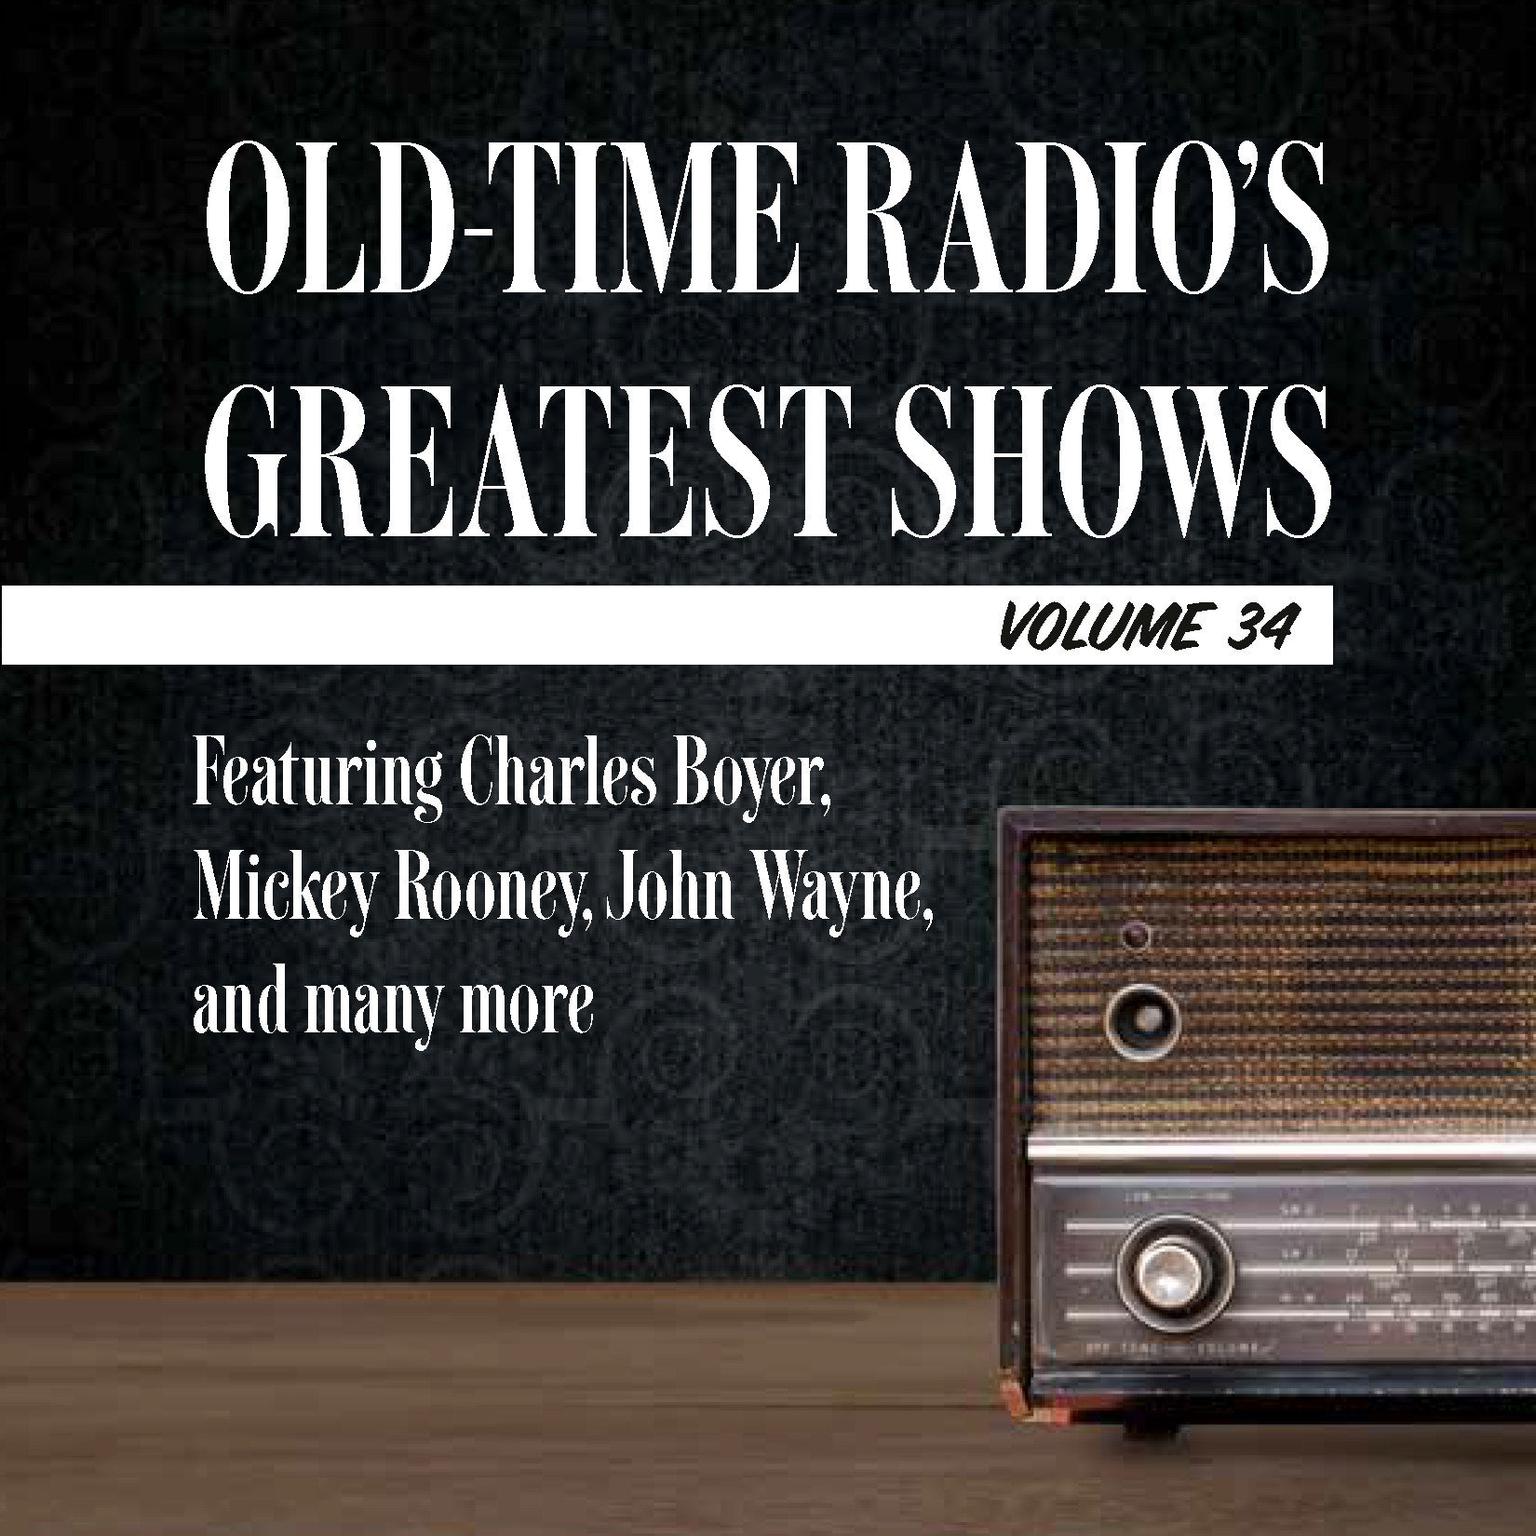 Old-Time Radios Greatest Shows, Volume 34: Featuring Charles Boyer, Mickey Rooney, John Wayne, and many more Audiobook, by Carl Amari